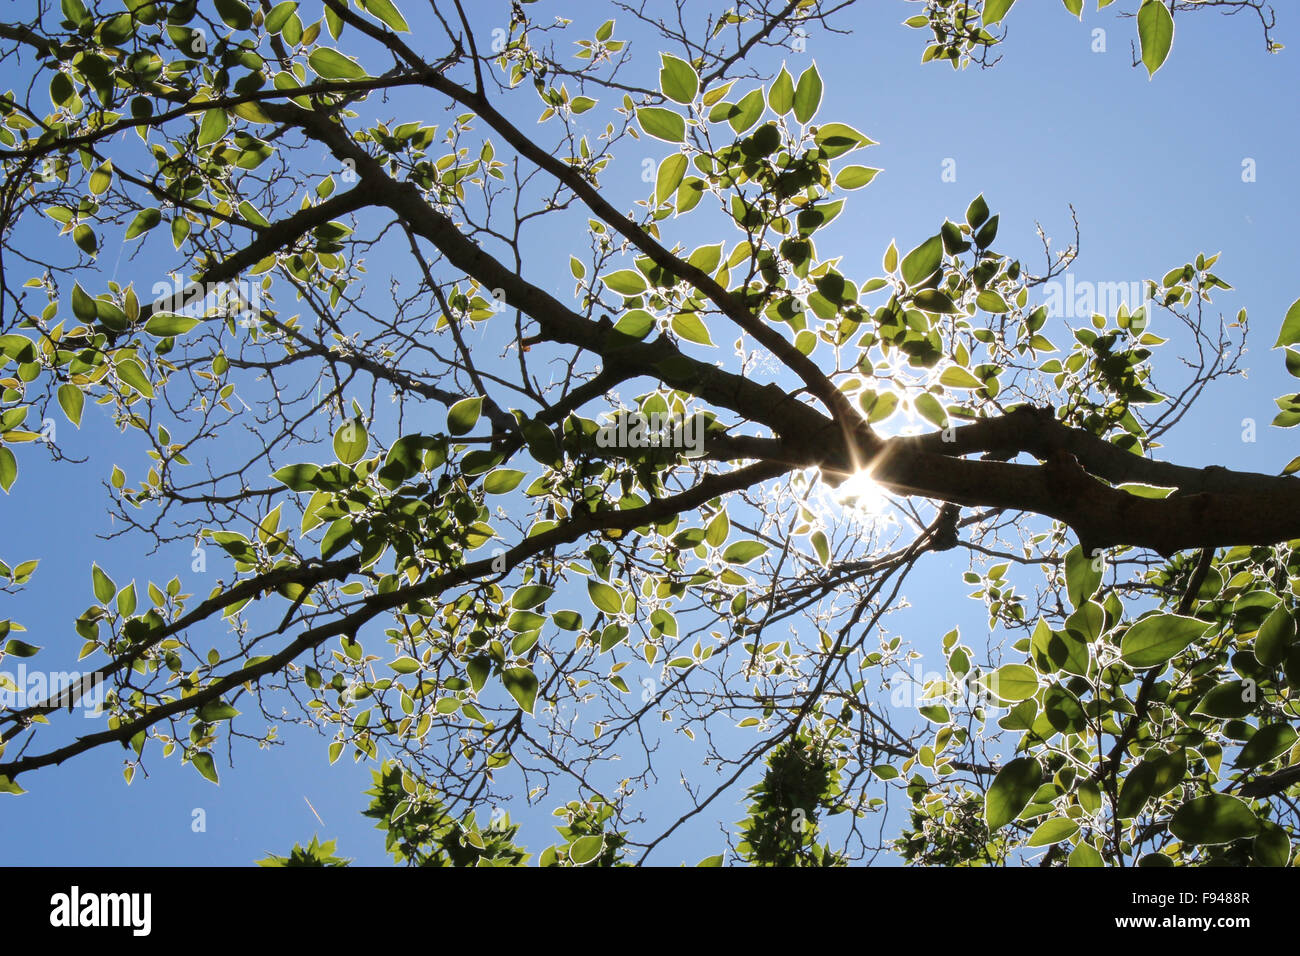 Branch of a tree with great leafs in the sun in front of the blue sky Stock Photo